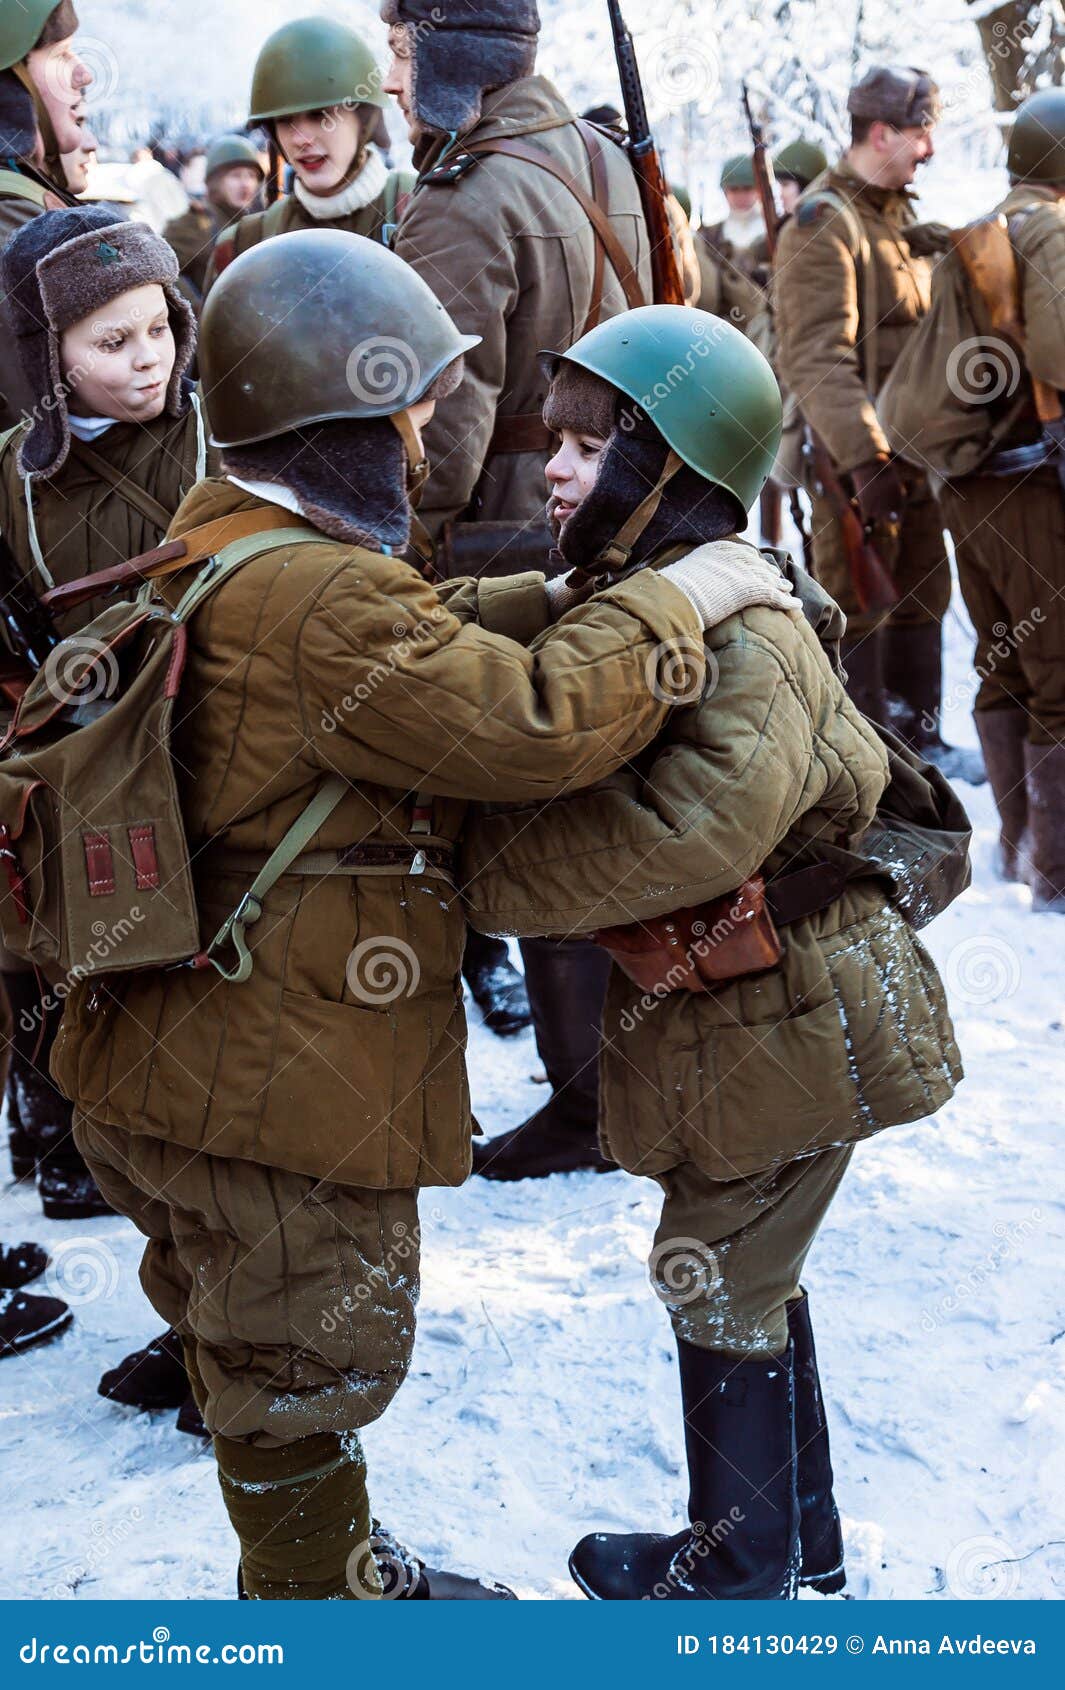 Second World War. Boys before the Battle Editorial Stock Image - Image ...